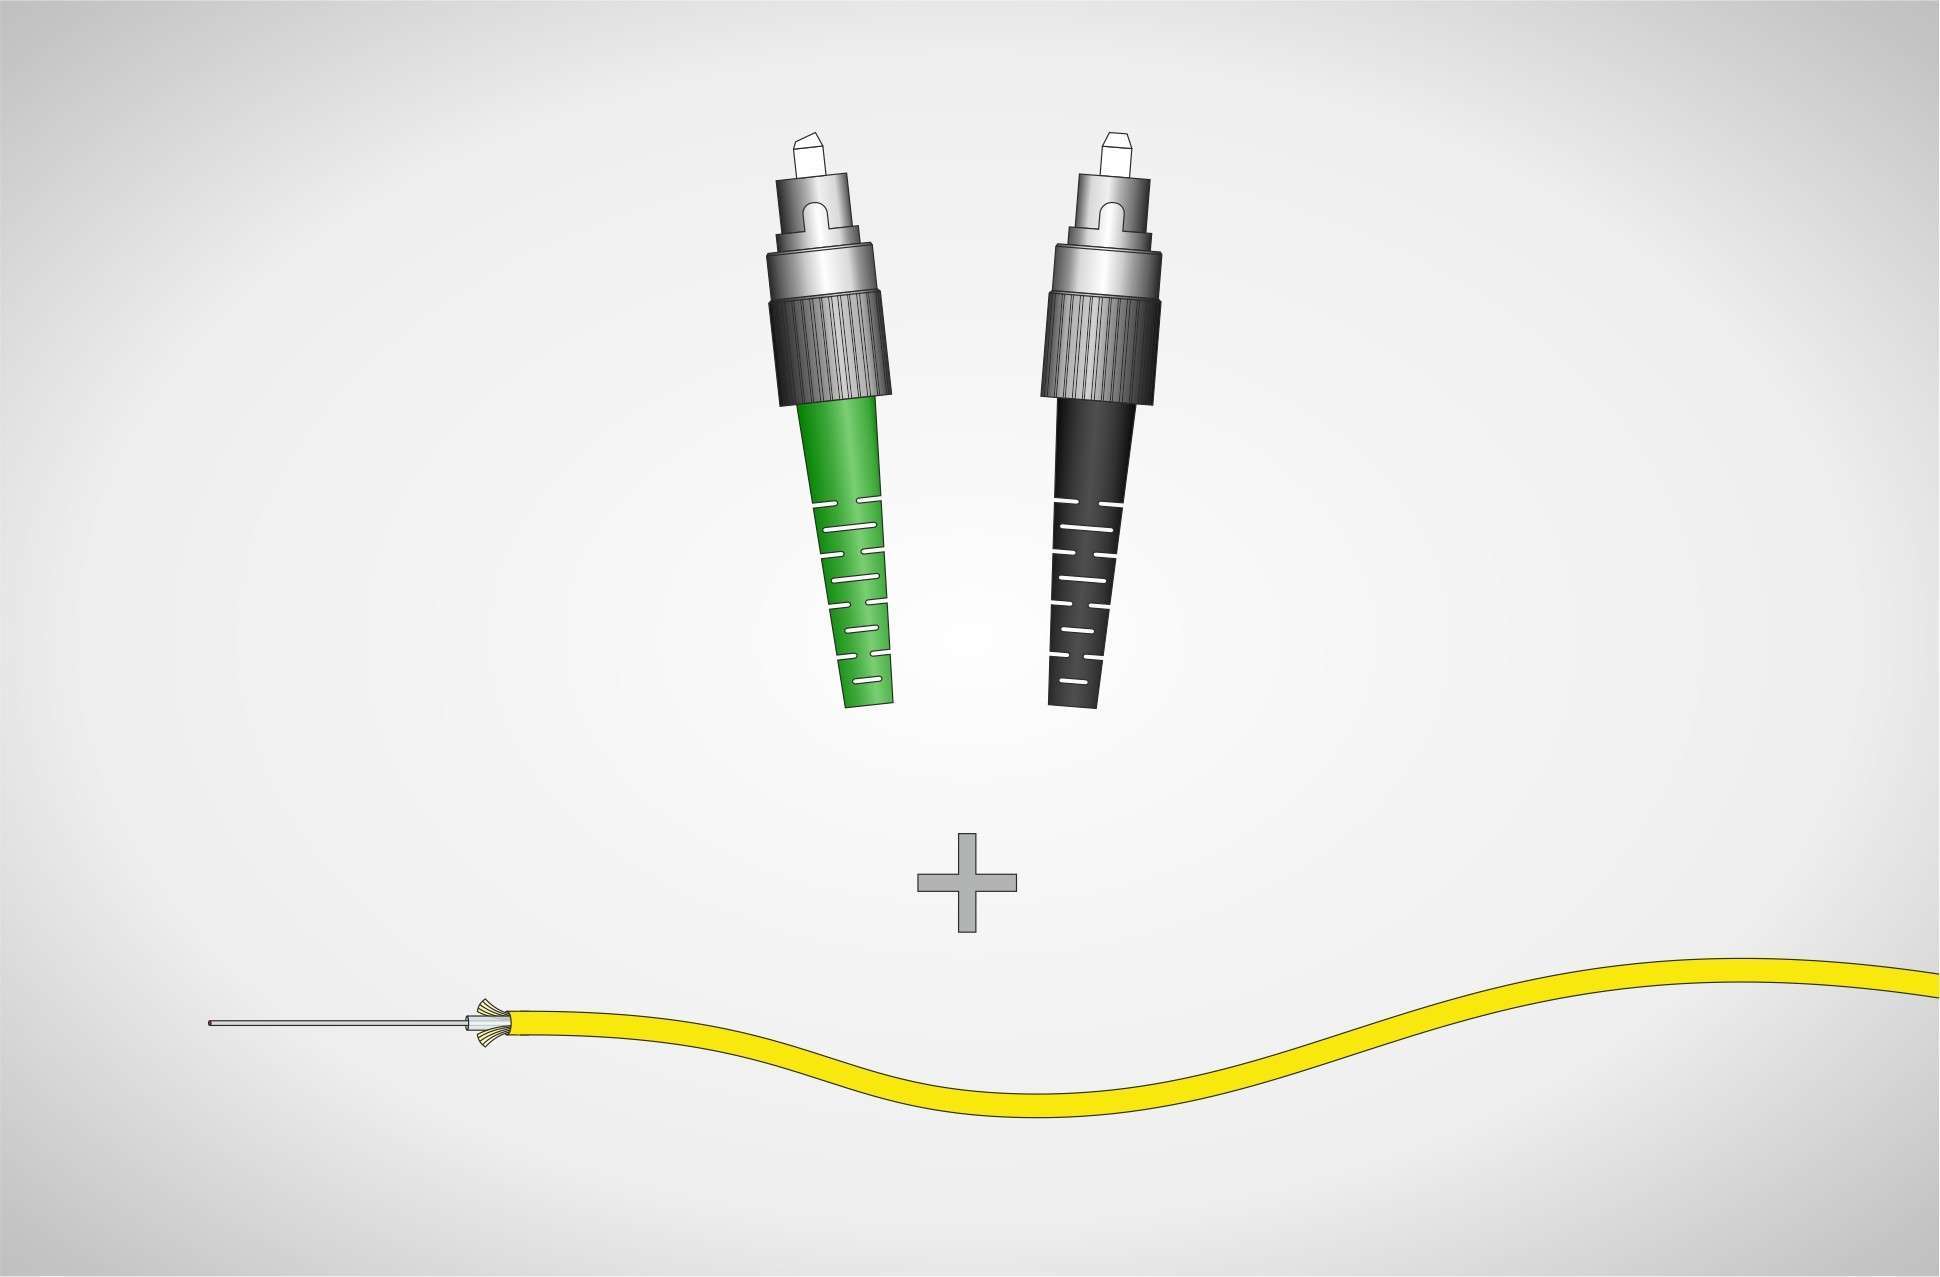 Configurable patch cable with Kevlar-reinforced tubing and a diameter of 2 mm